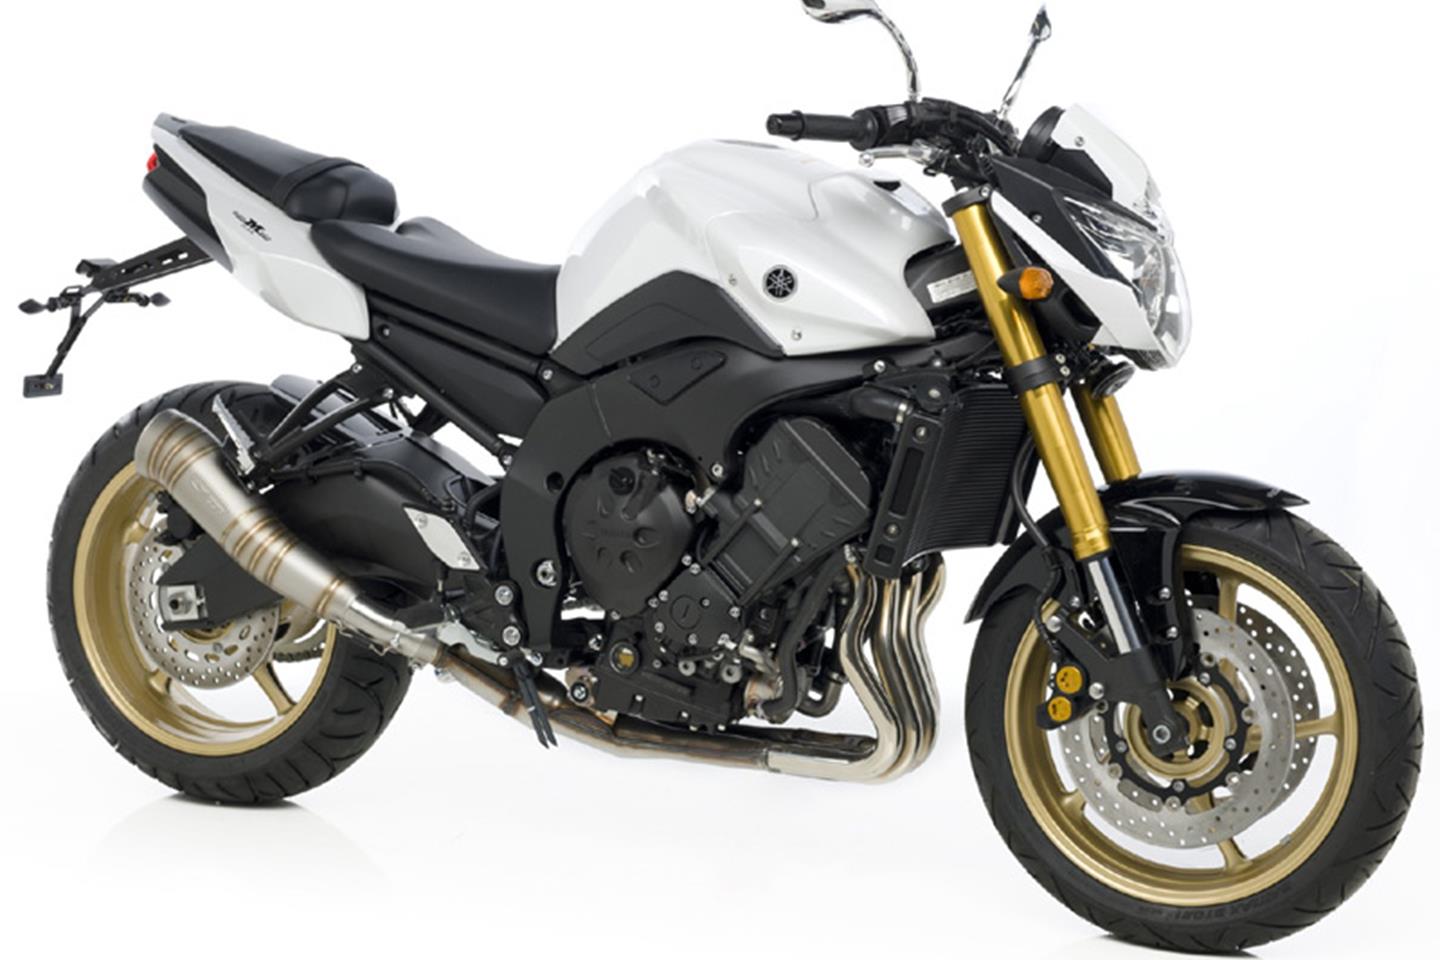 New Leo Vince exhausts for Yamaha FZ8 | MCN